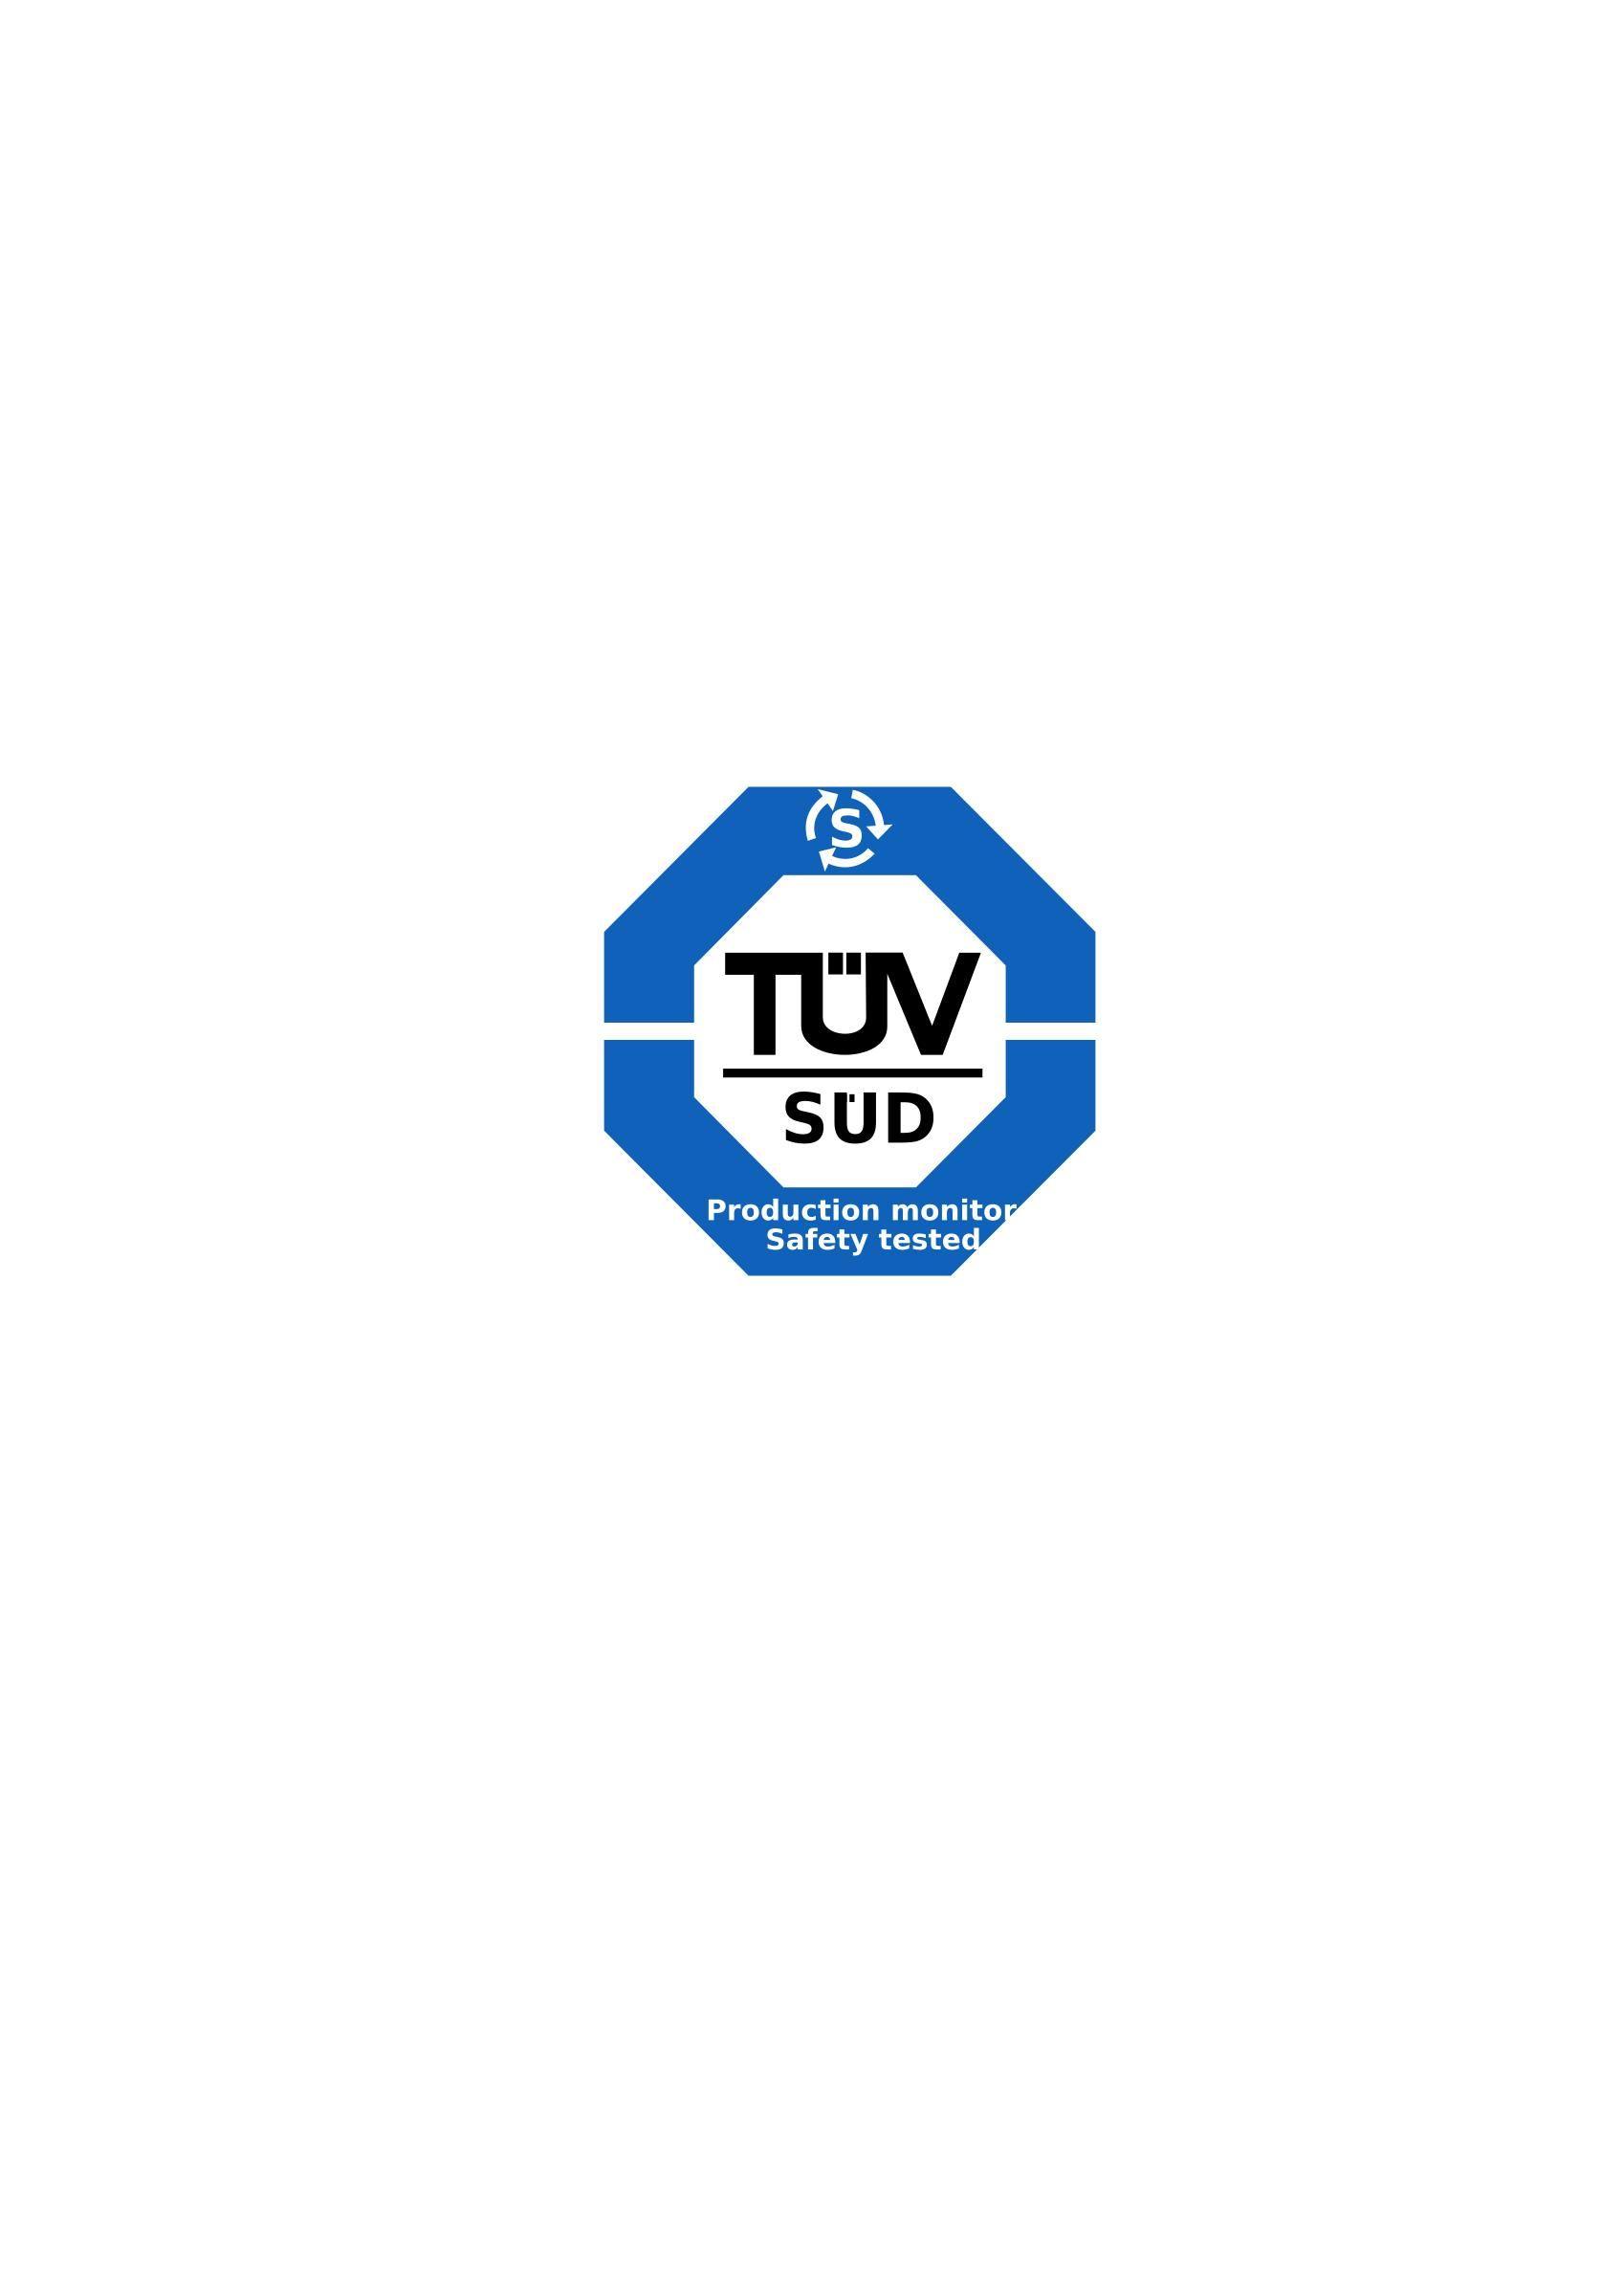 Tuv Logo - TUV SUD logo Icon PNG PNG and Icon Downloads